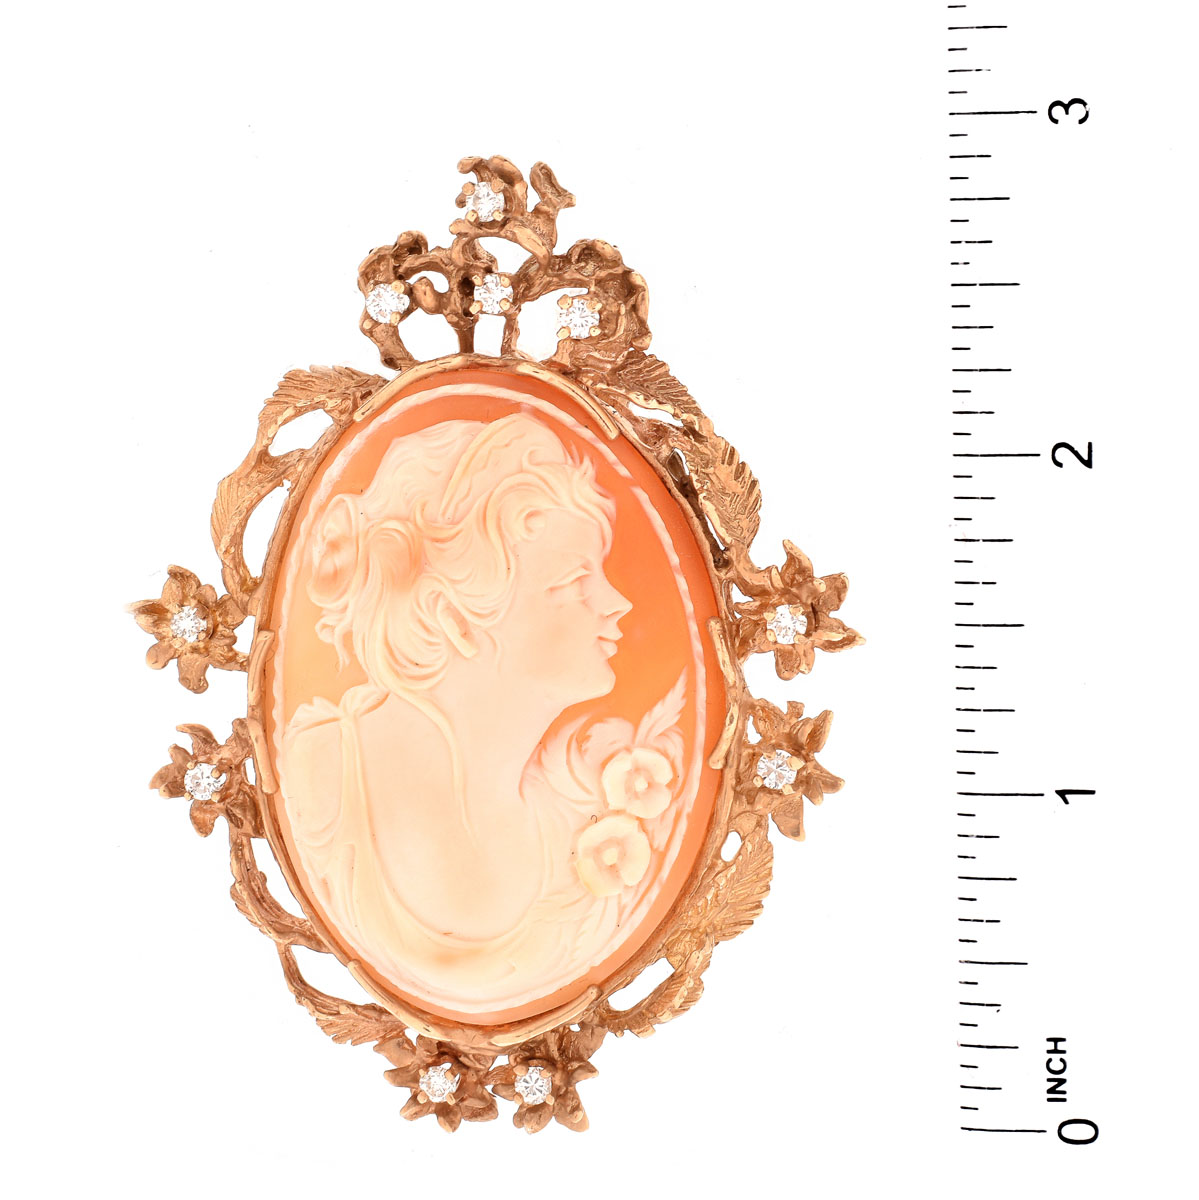 Carved Shell Cameo, Round Brilliant Cut Diamond and 14 Karat Yellow Gold Brooch. Unsigned.